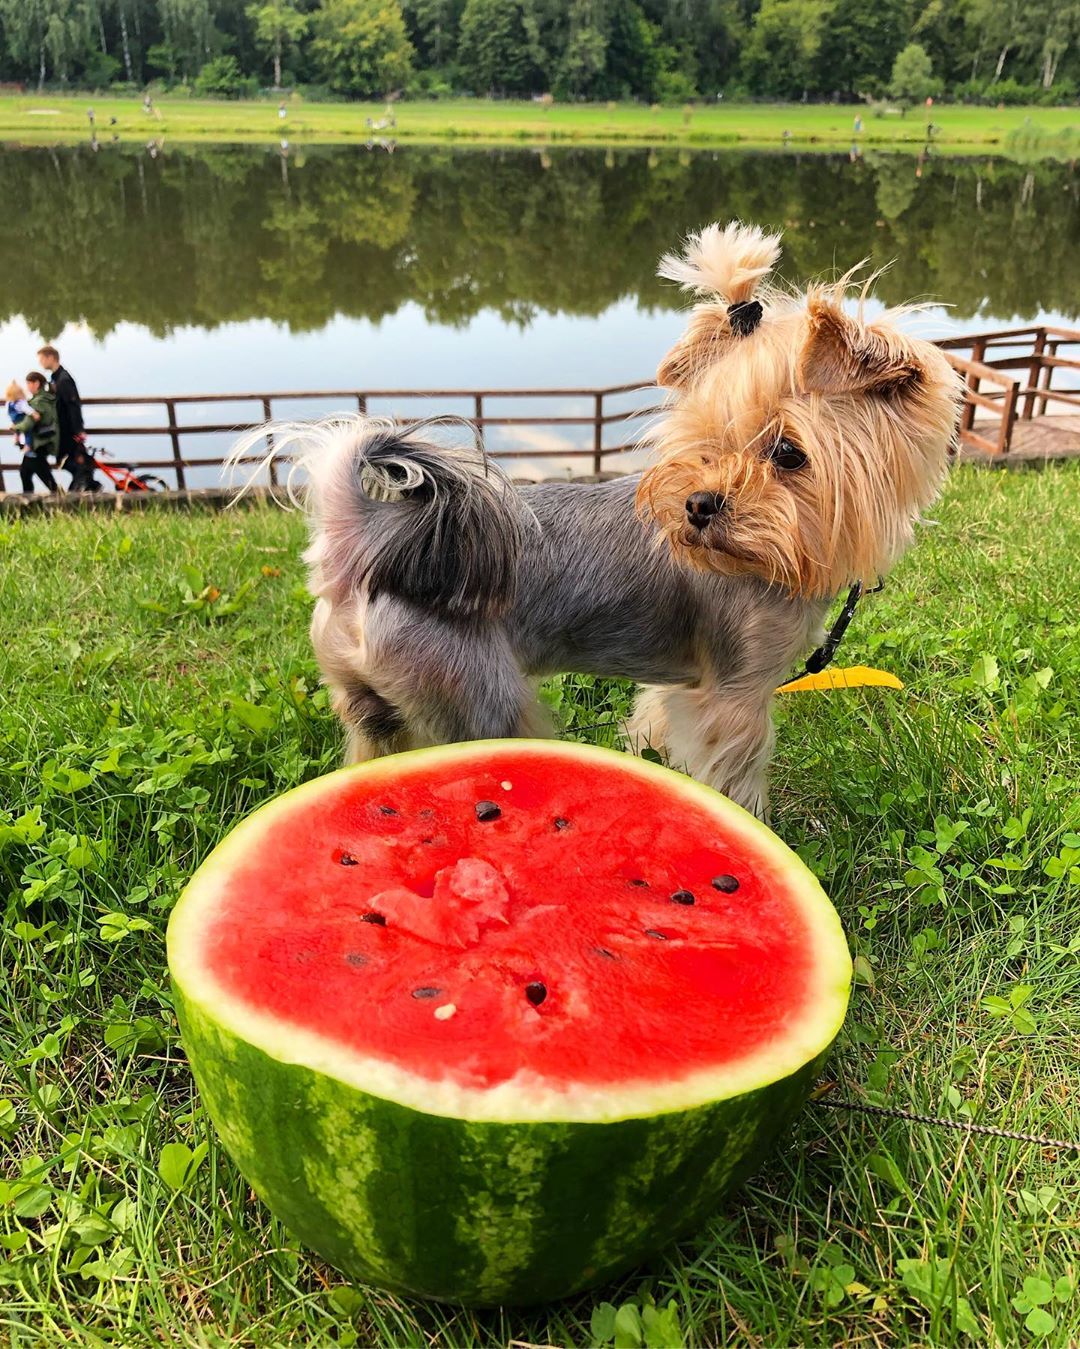 A Yorkshire Terrier standing by the lake behind a sliced watermelon